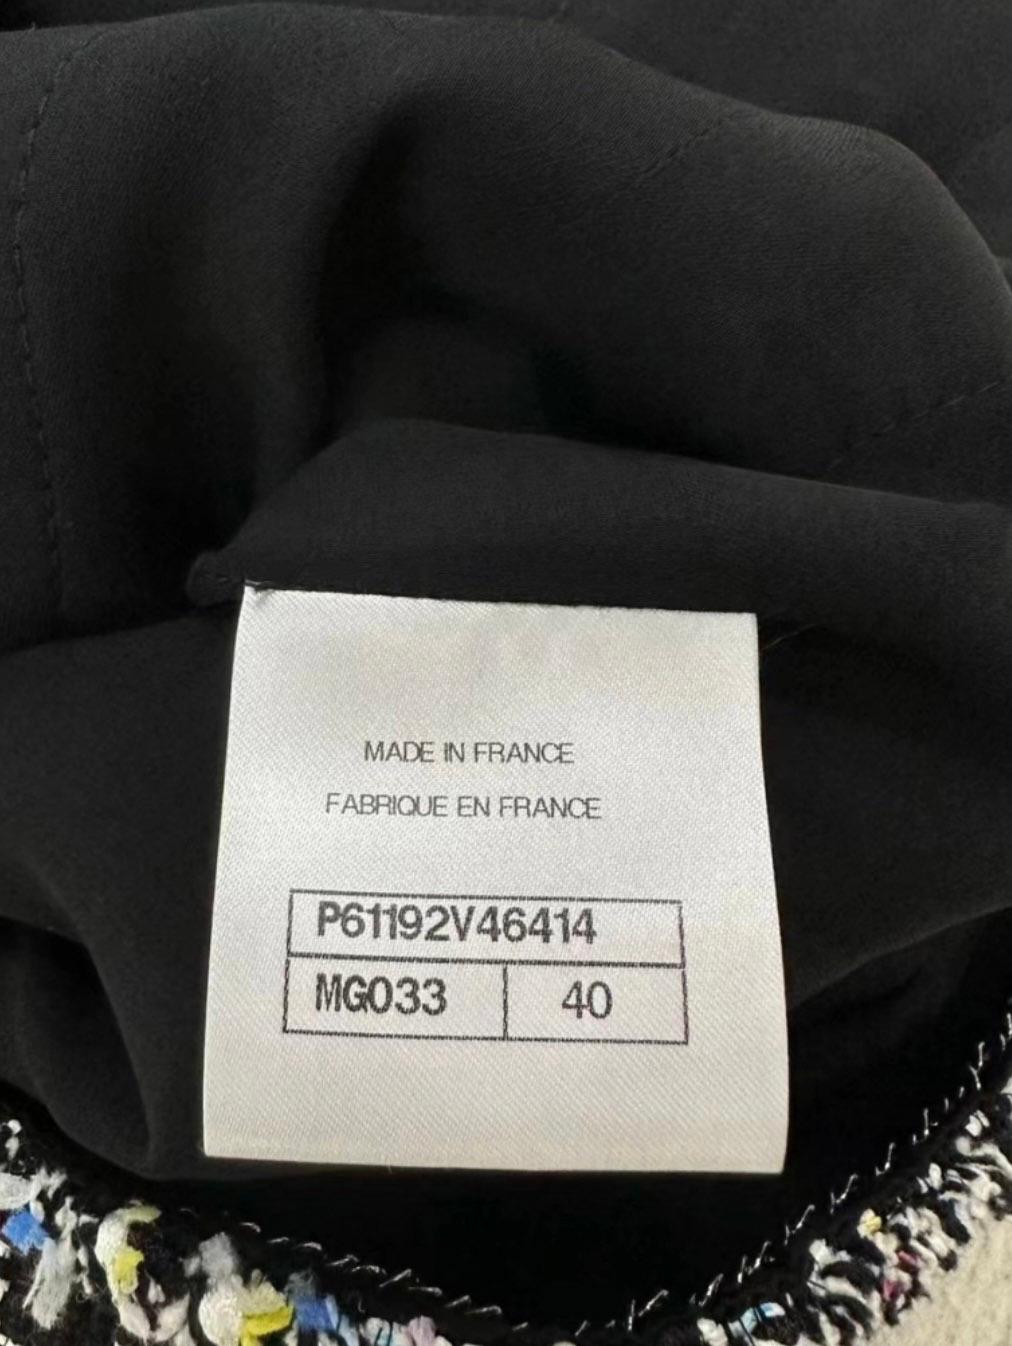 Chanel Iconic 2019 Spring Black Tweed Jacket  For Sale 7